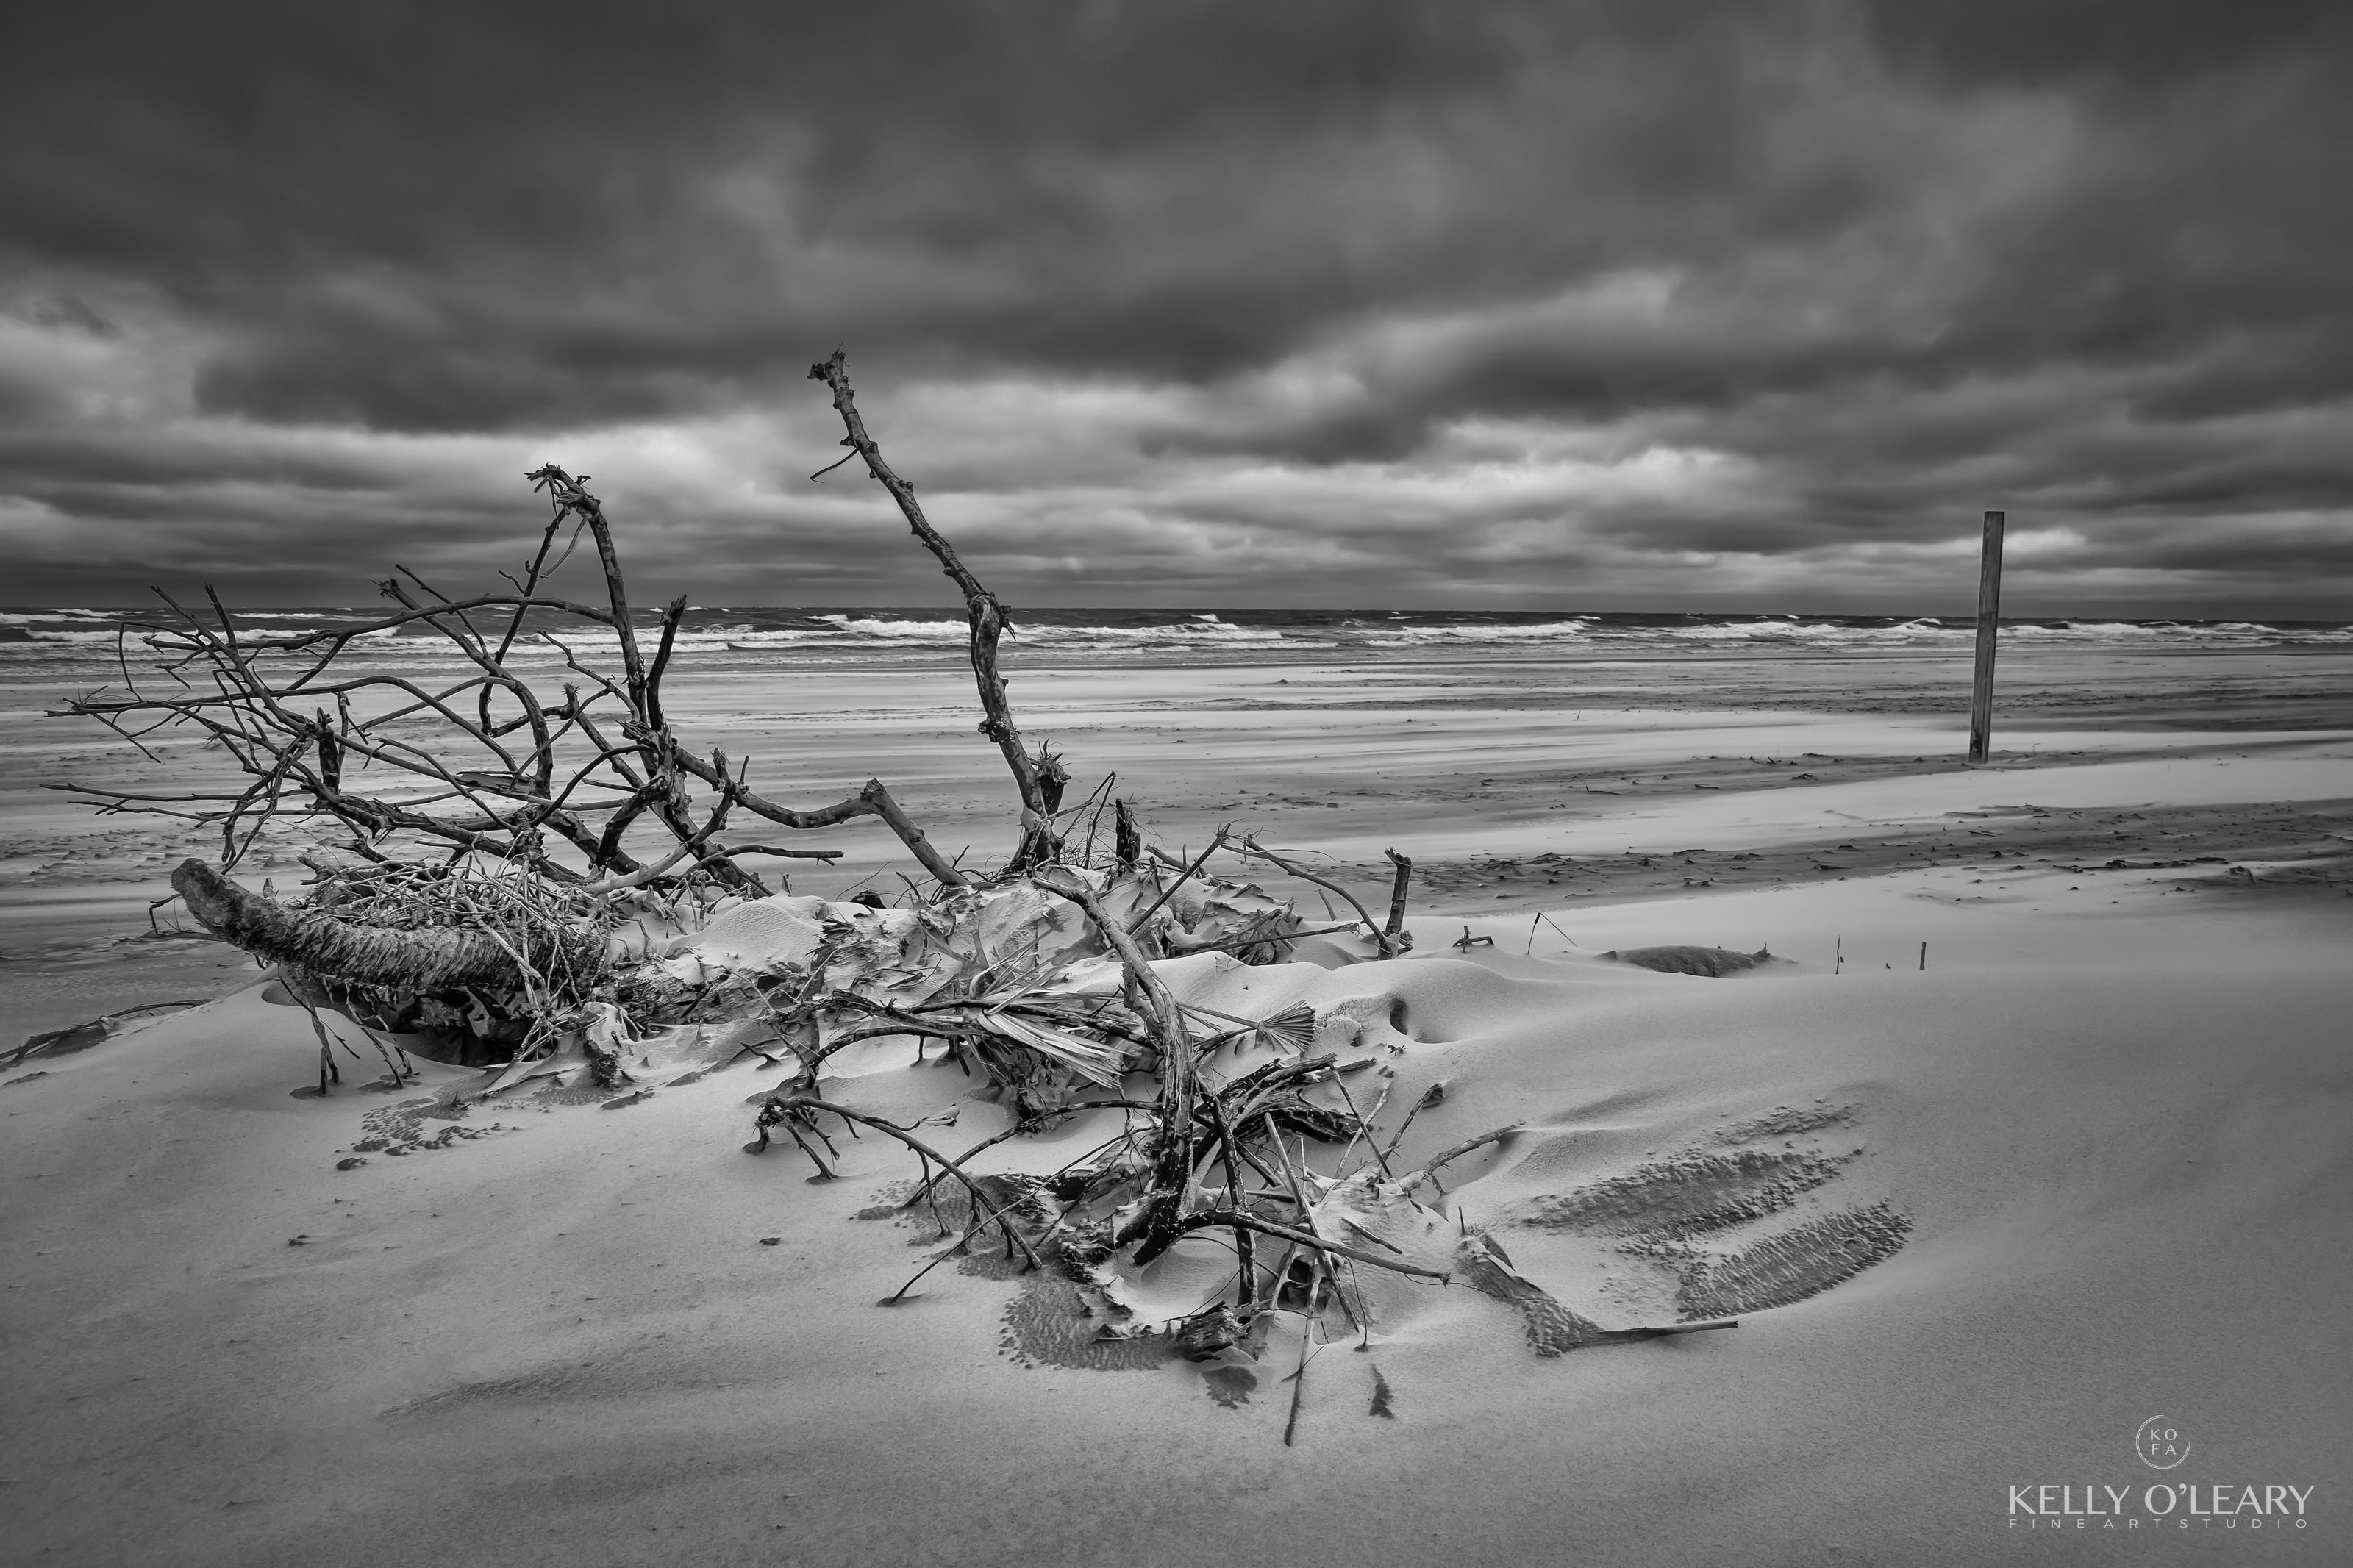 A photo by Kelly O'Leary of a decaying tree on a beach | Photo Title: Beach Sculpture | 
        Photo by Kelly O'Leary ©2023